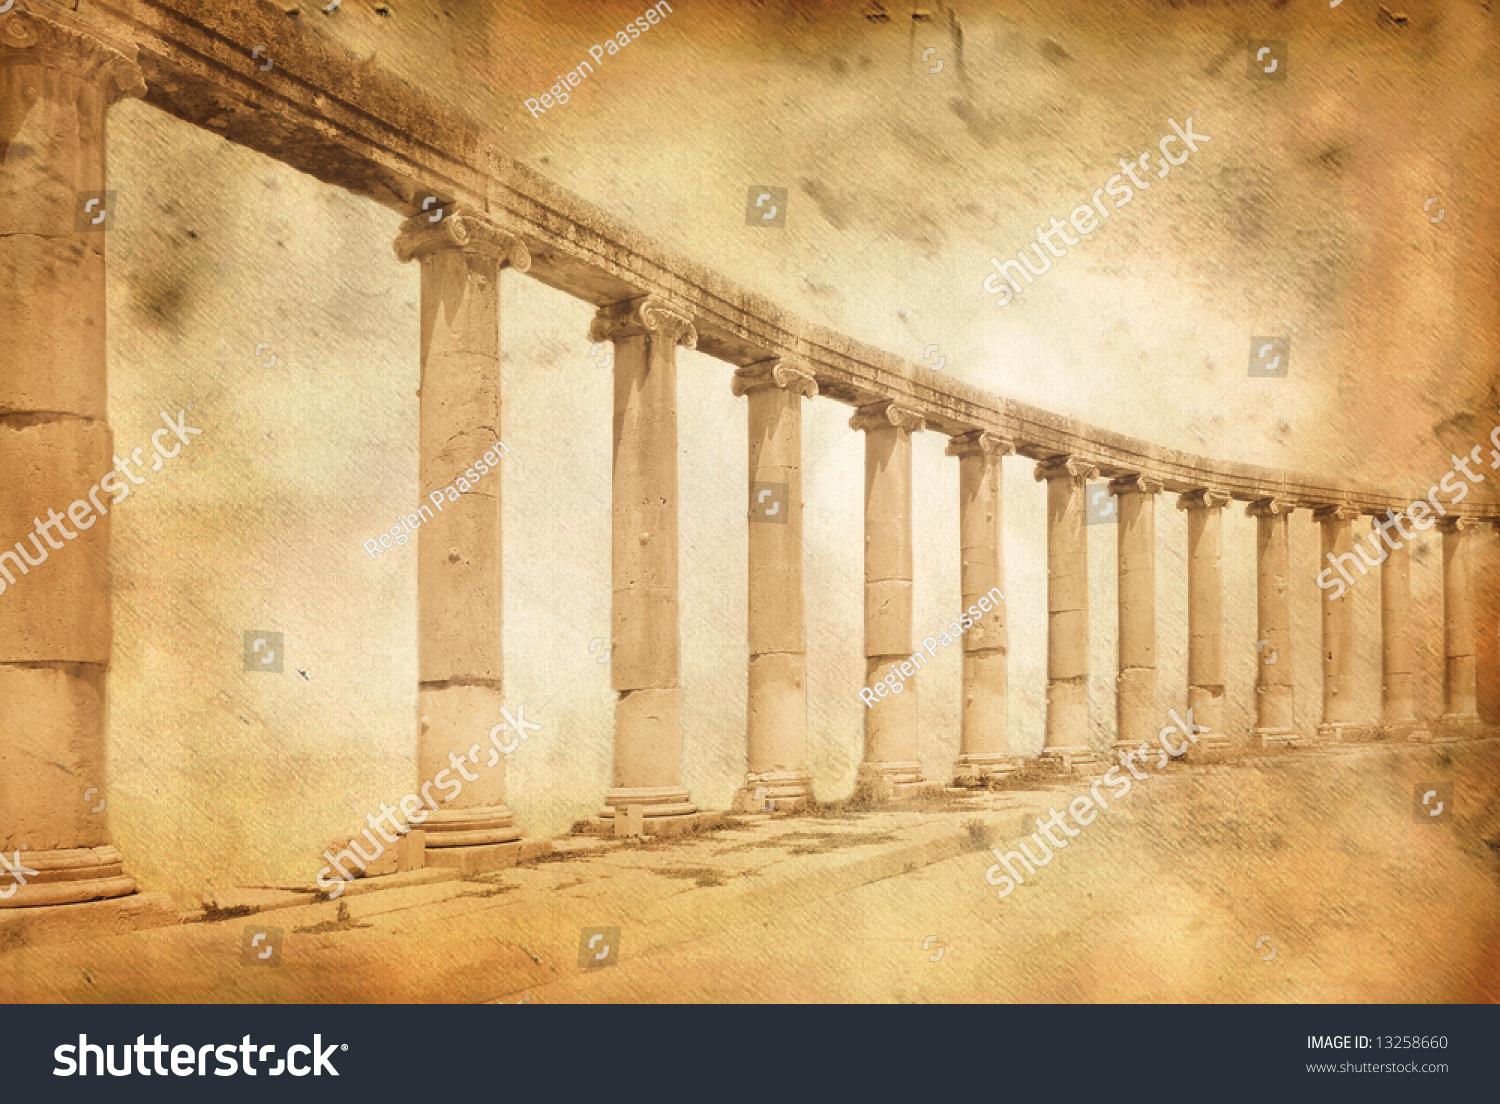 Compare and contrast Greek and Roman architecture